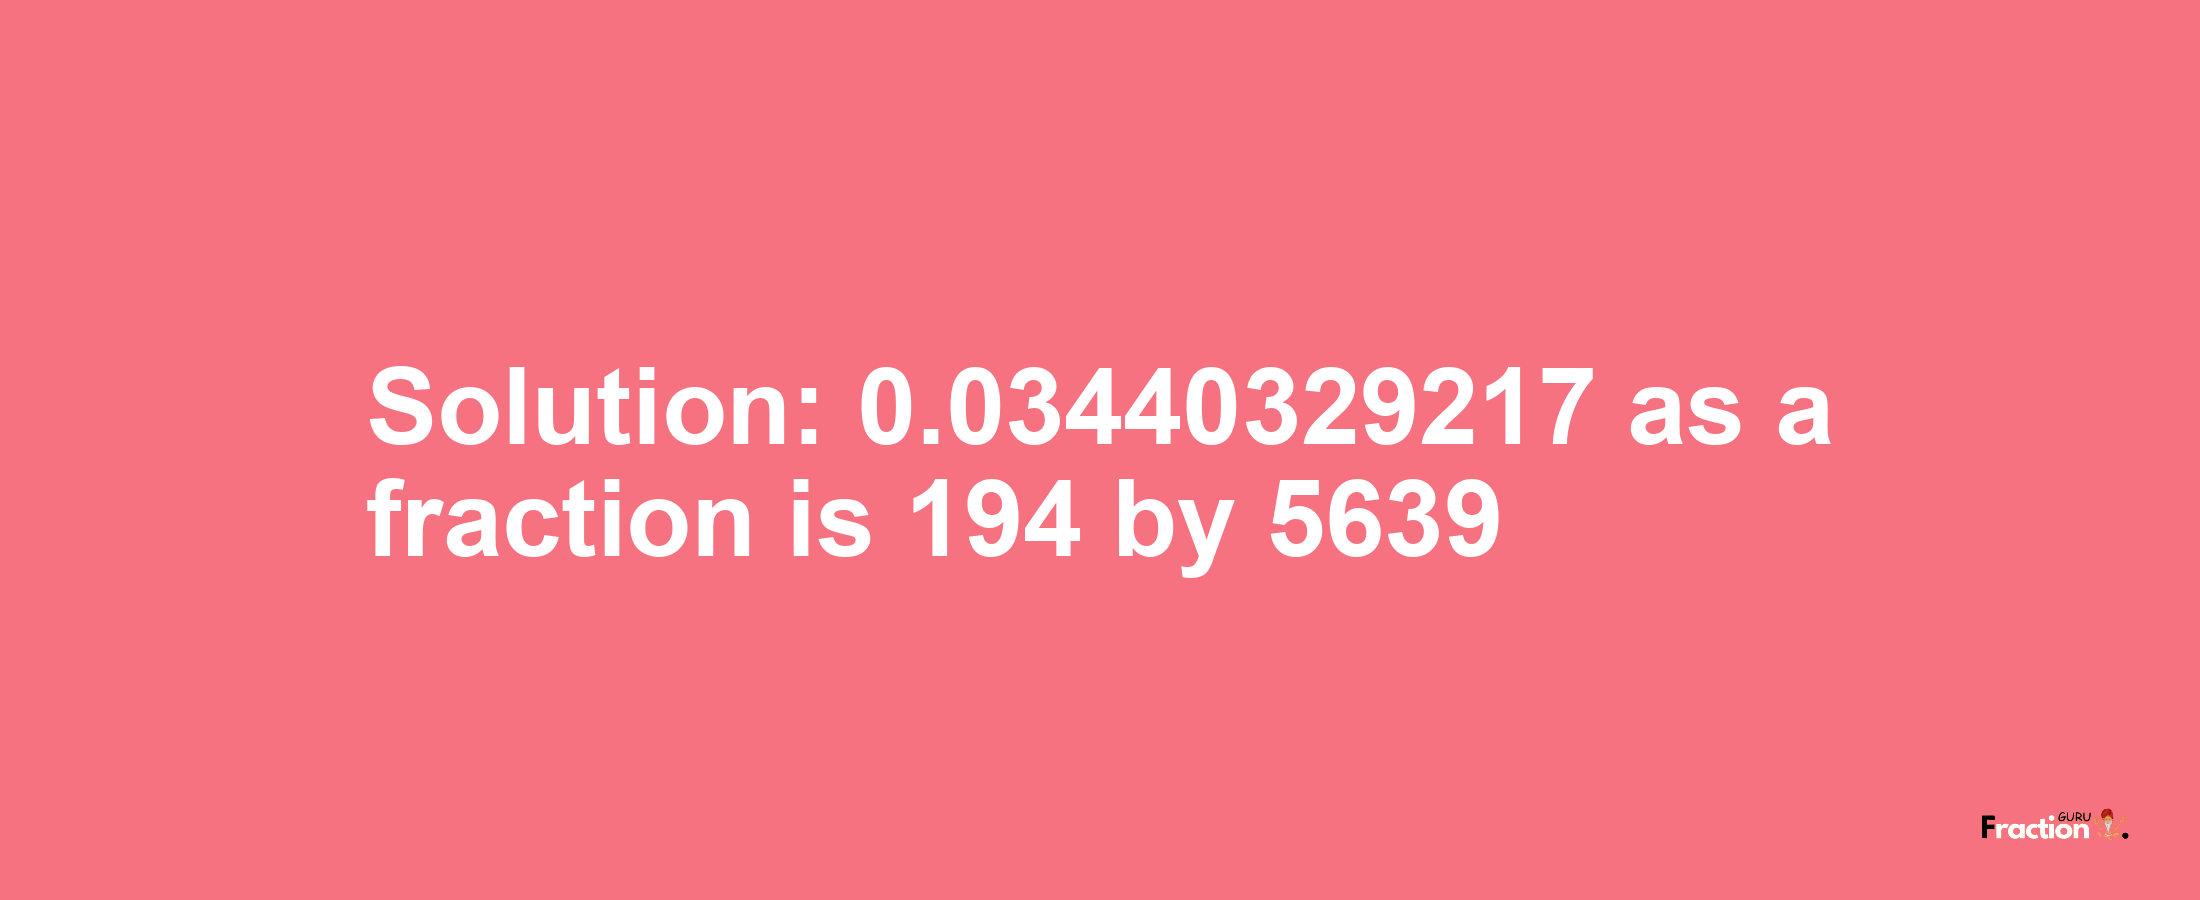 Solution:0.03440329217 as a fraction is 194/5639